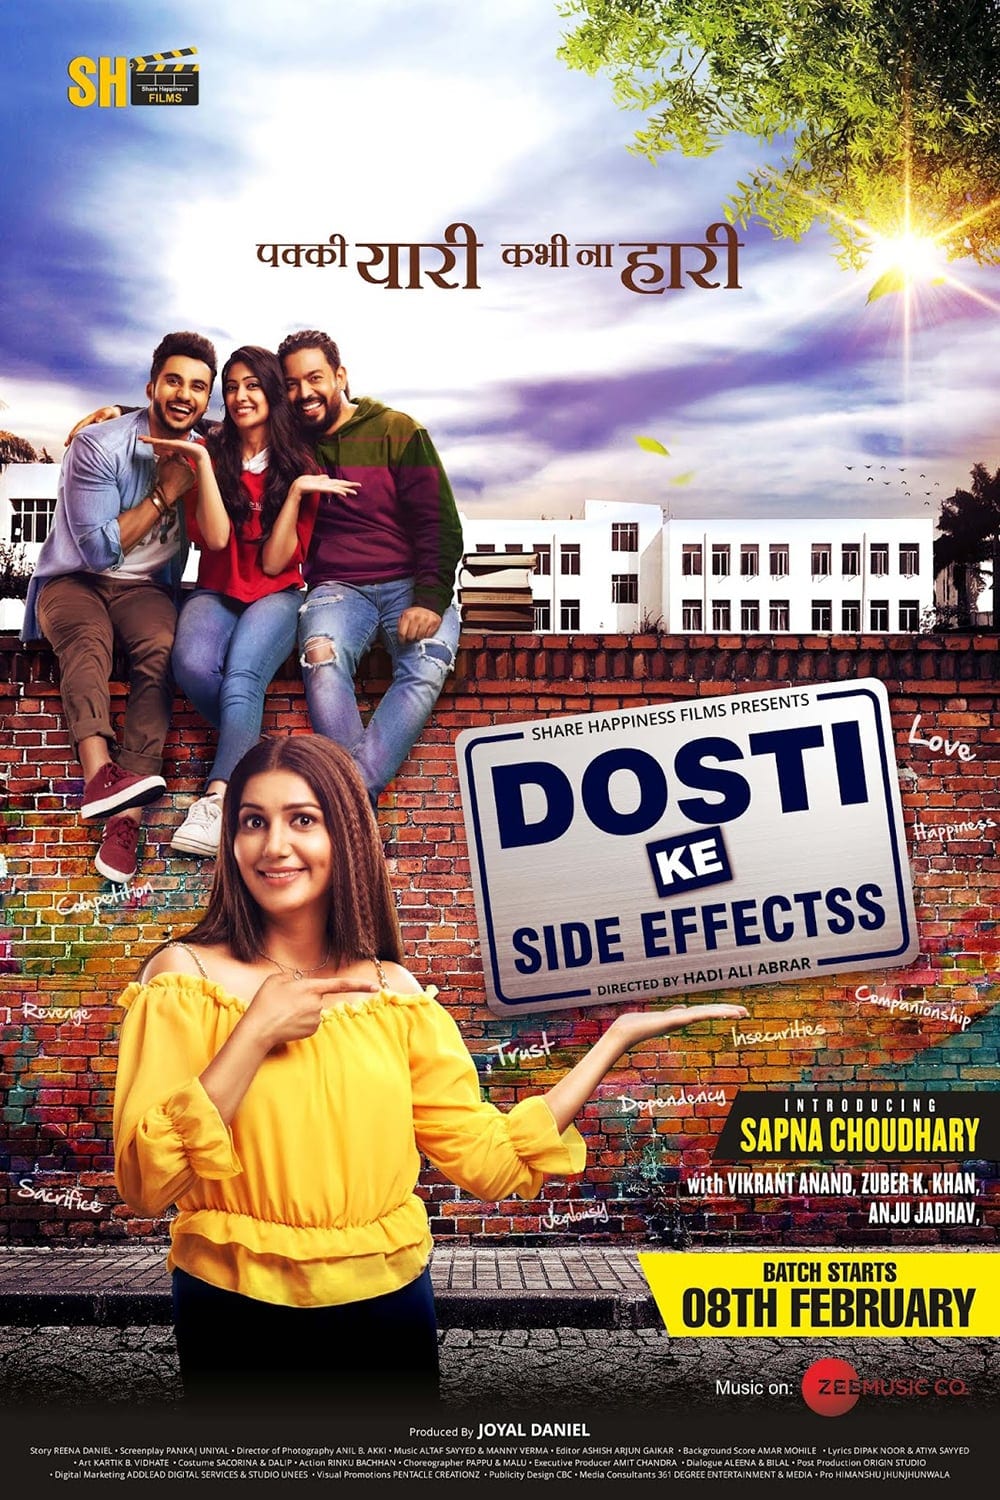 Poster for the movie "Dosti Ke Side Effects"